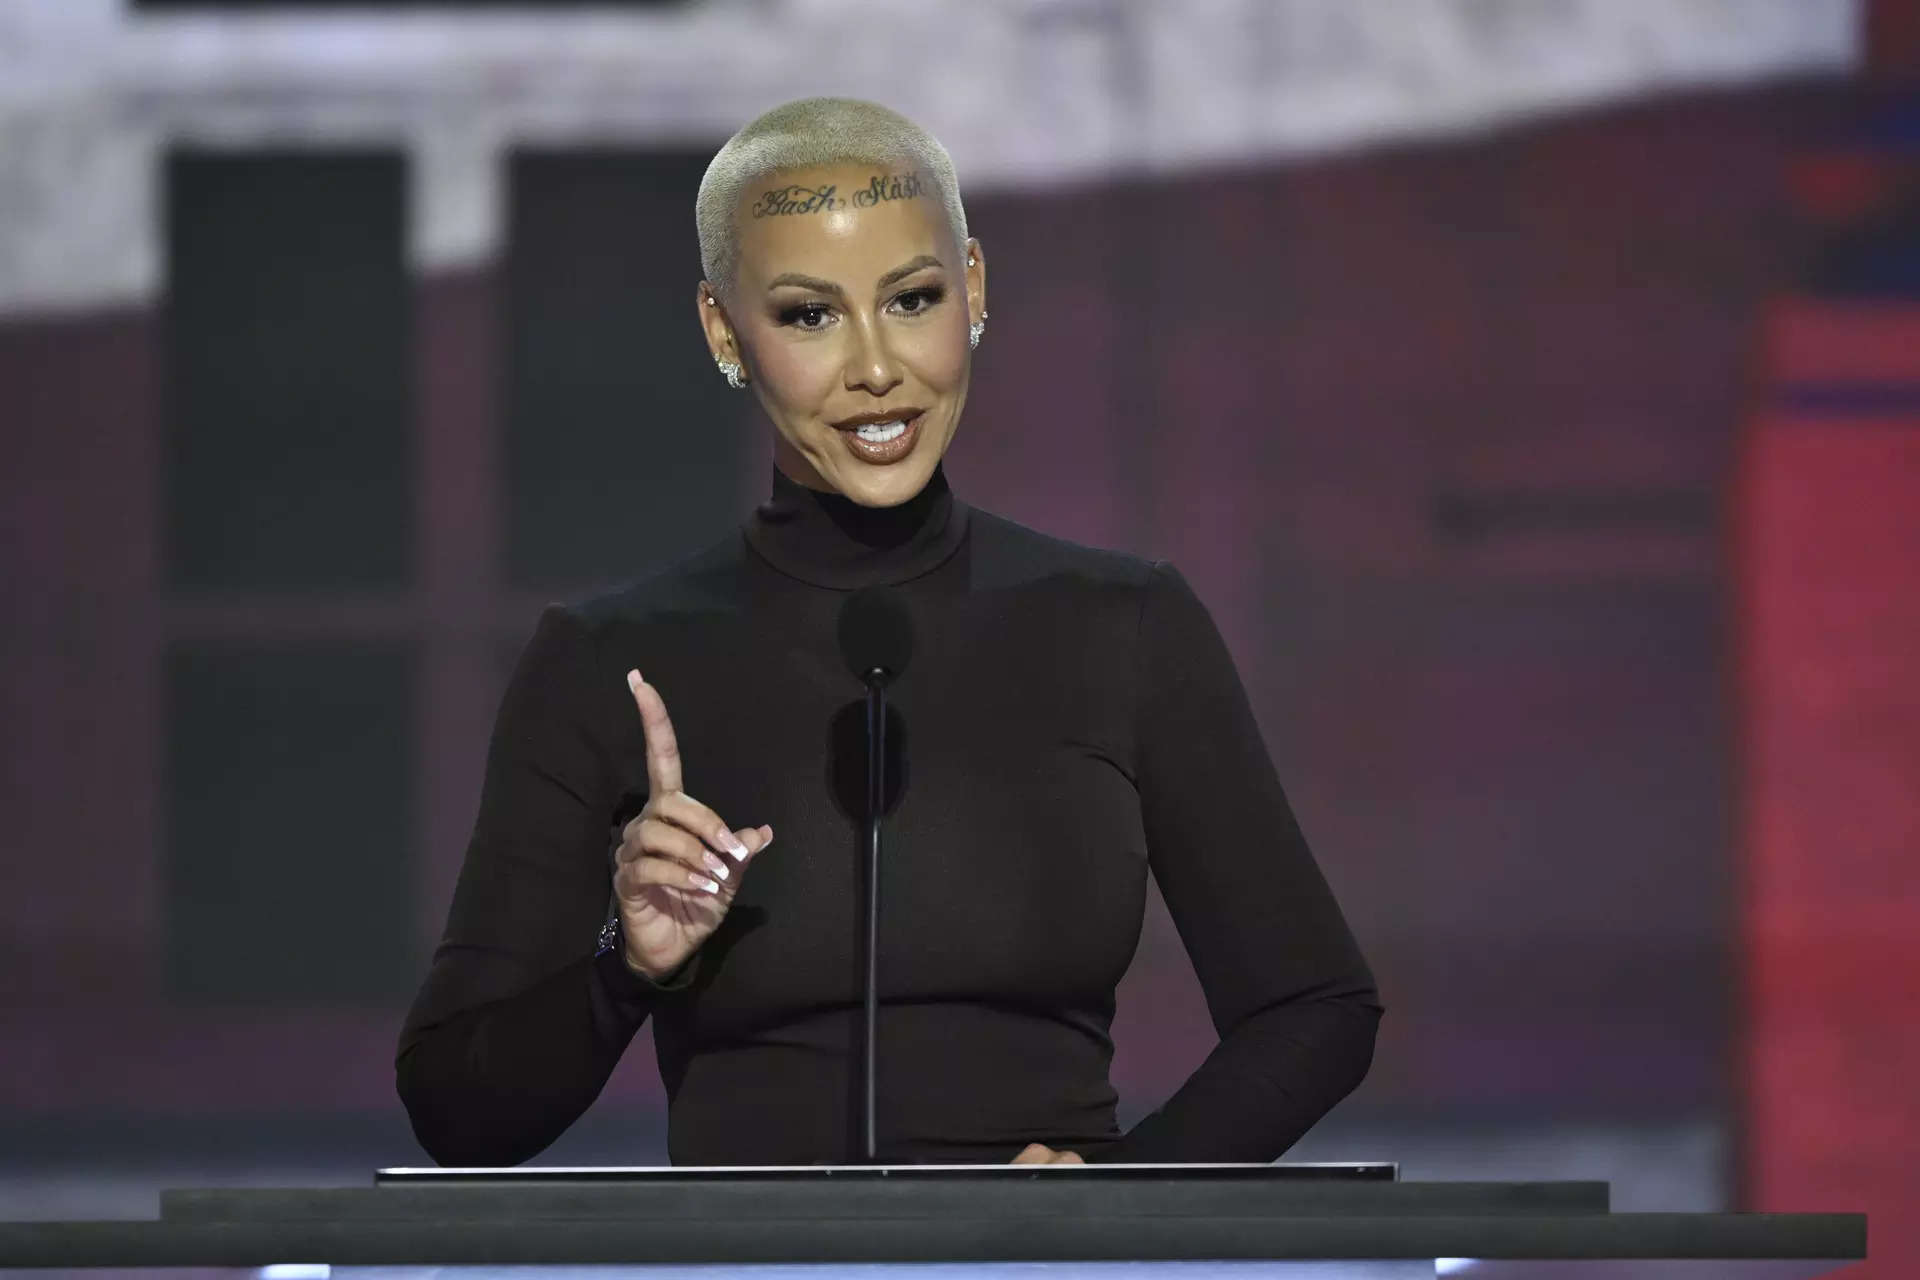 What does ‘Bash Slash’ mean? Why did Amber Rose support Donald Trump at the RNC? 